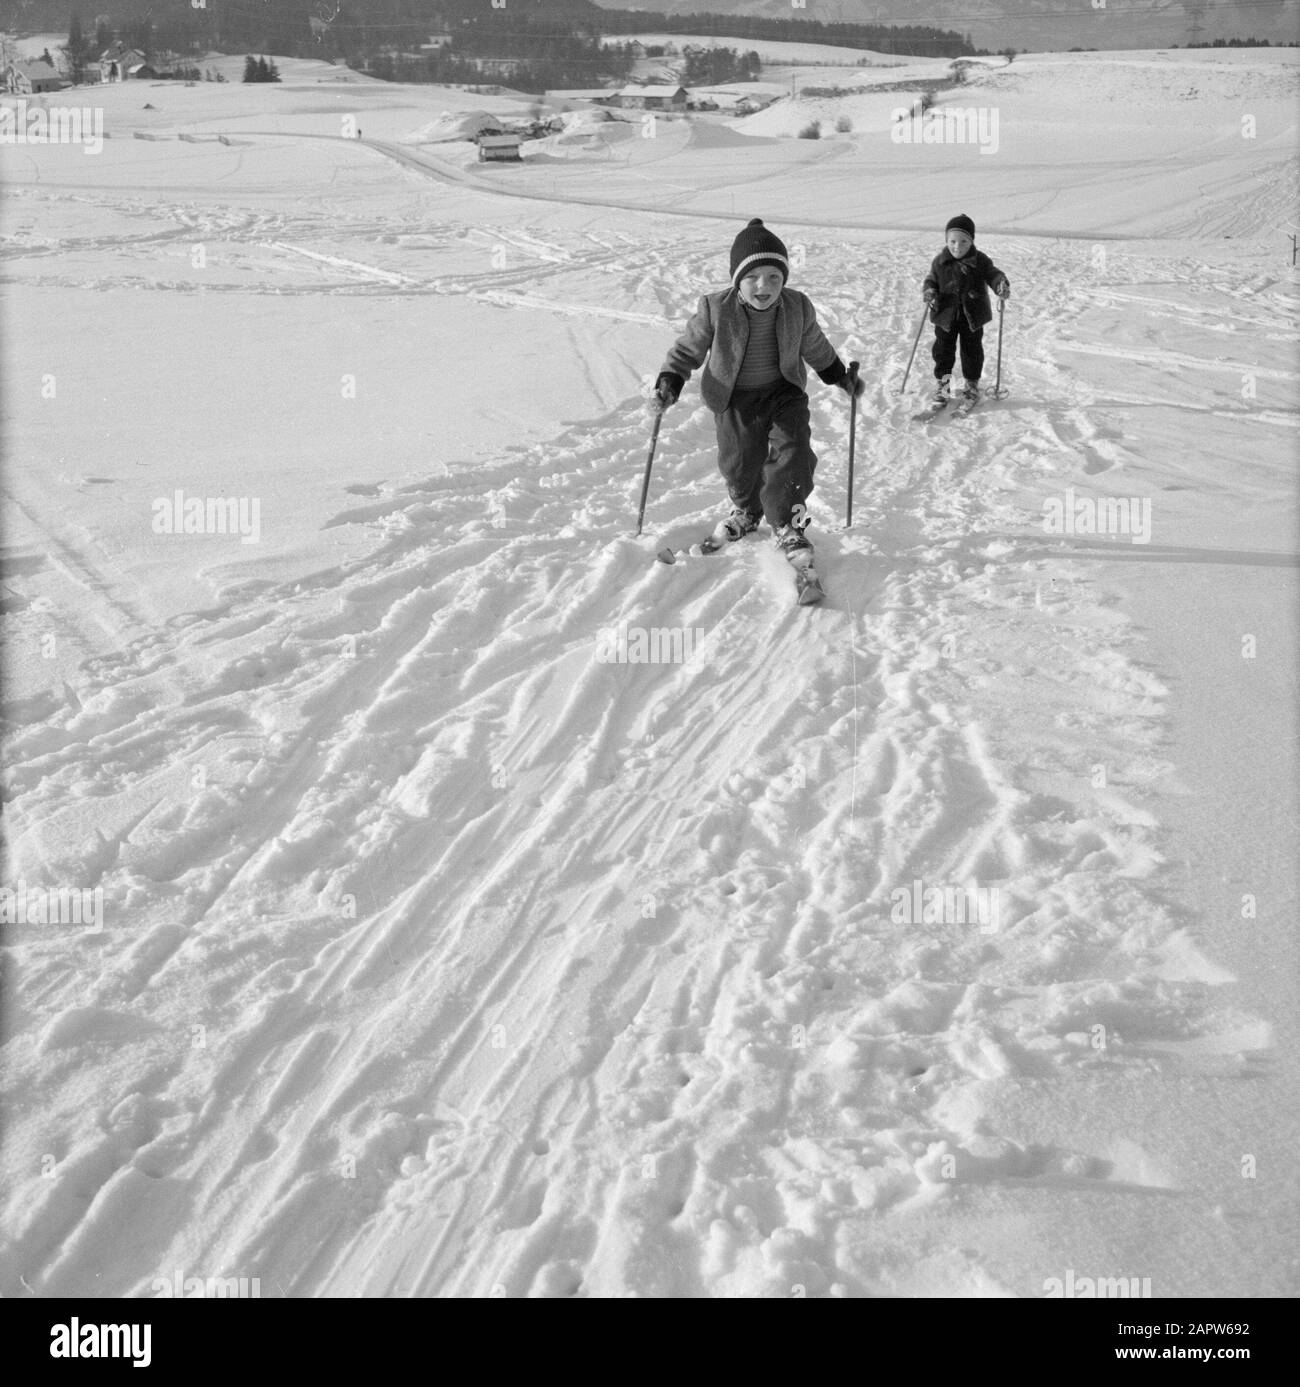 Winter in Tyrol  Children with skis in the snow Date: January 1960 Location: Austria, Sistrans, Tyrol Keywords: landscapes, cross-country skiing, skiing, snow, winter sports Stock Photo